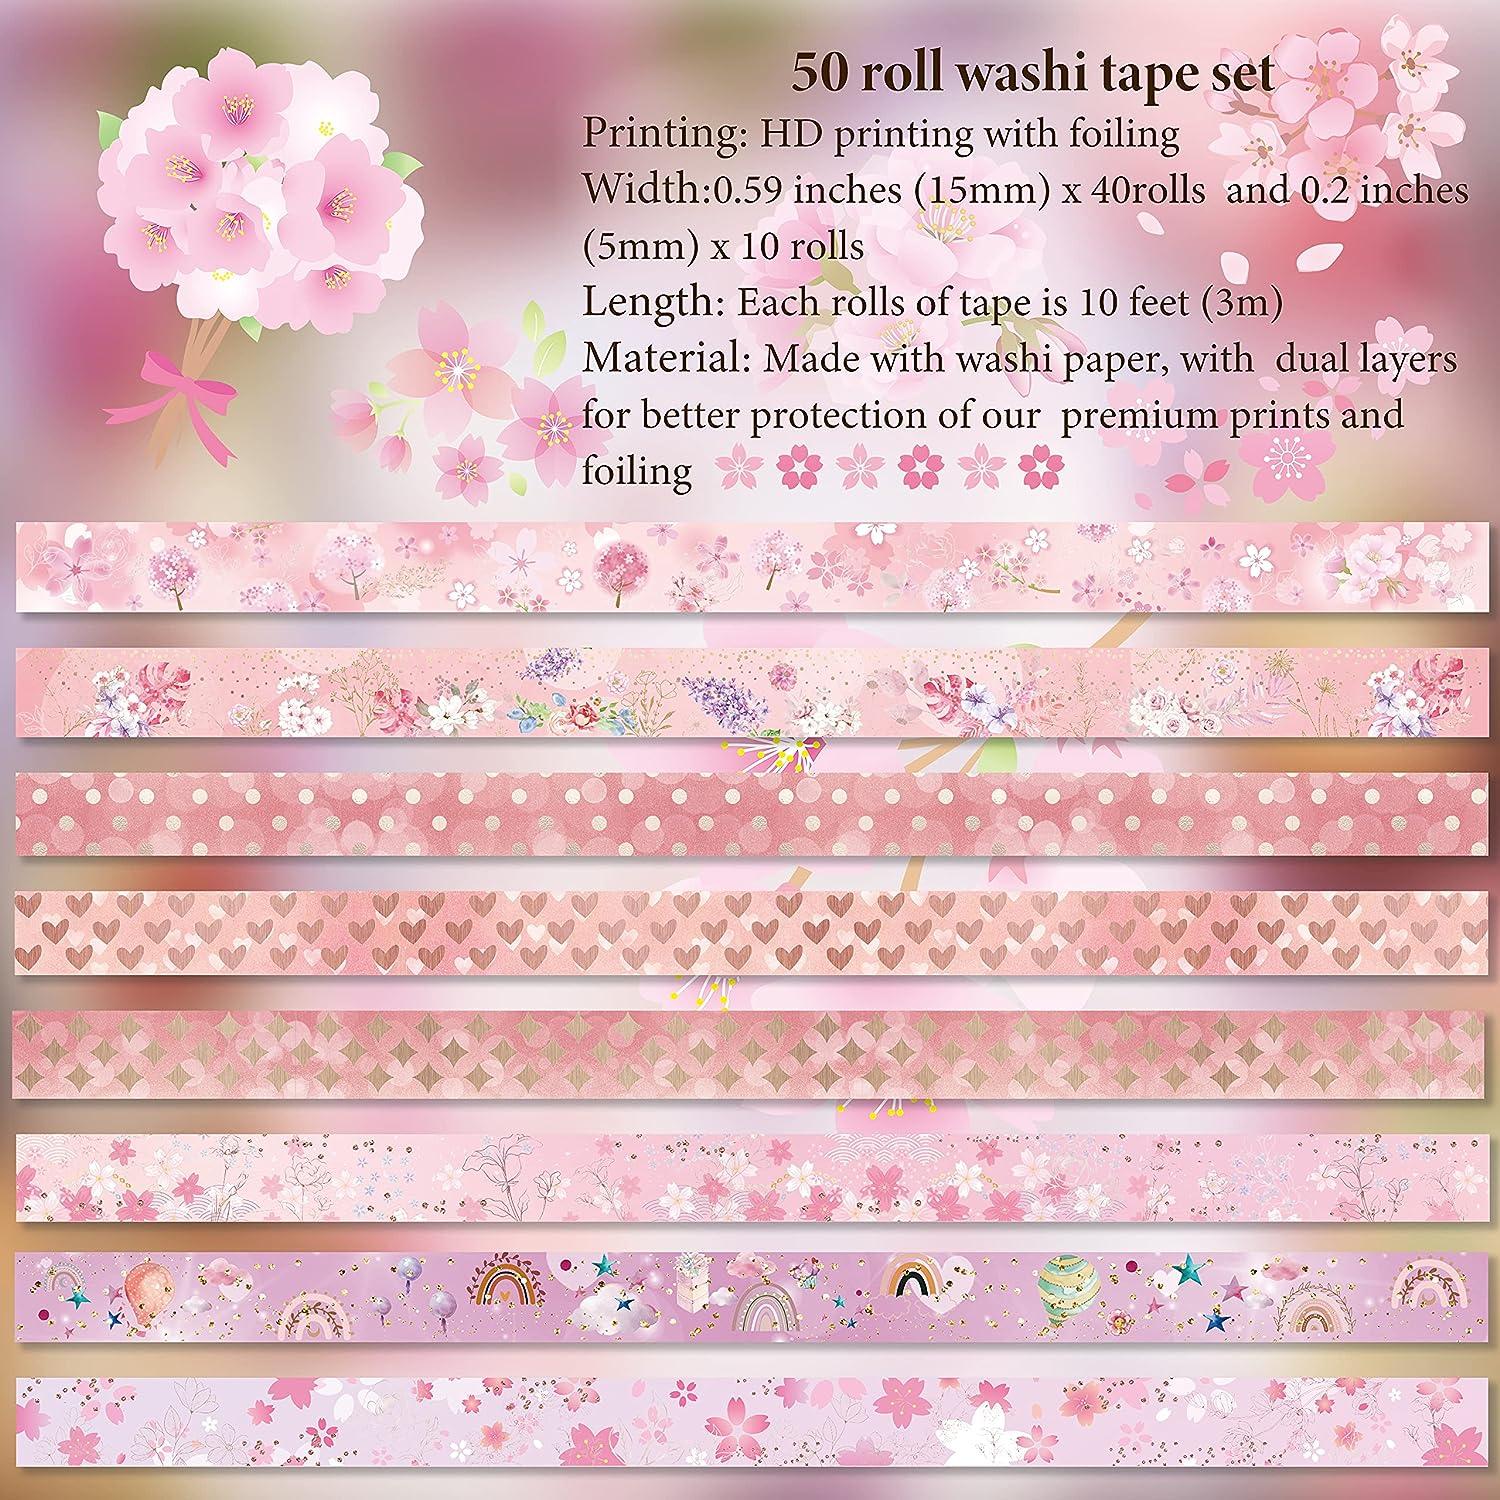  slapaflife Cute Washi Tape Set 50 Rolls Kawaii Animals Gold  Foil Decorative Masking Tape for Scrapbook,Washi Tape for  Journaling,Scrapbooking Supplies,Party Decorations,Bullet Journals : Arts,  Crafts & Sewing